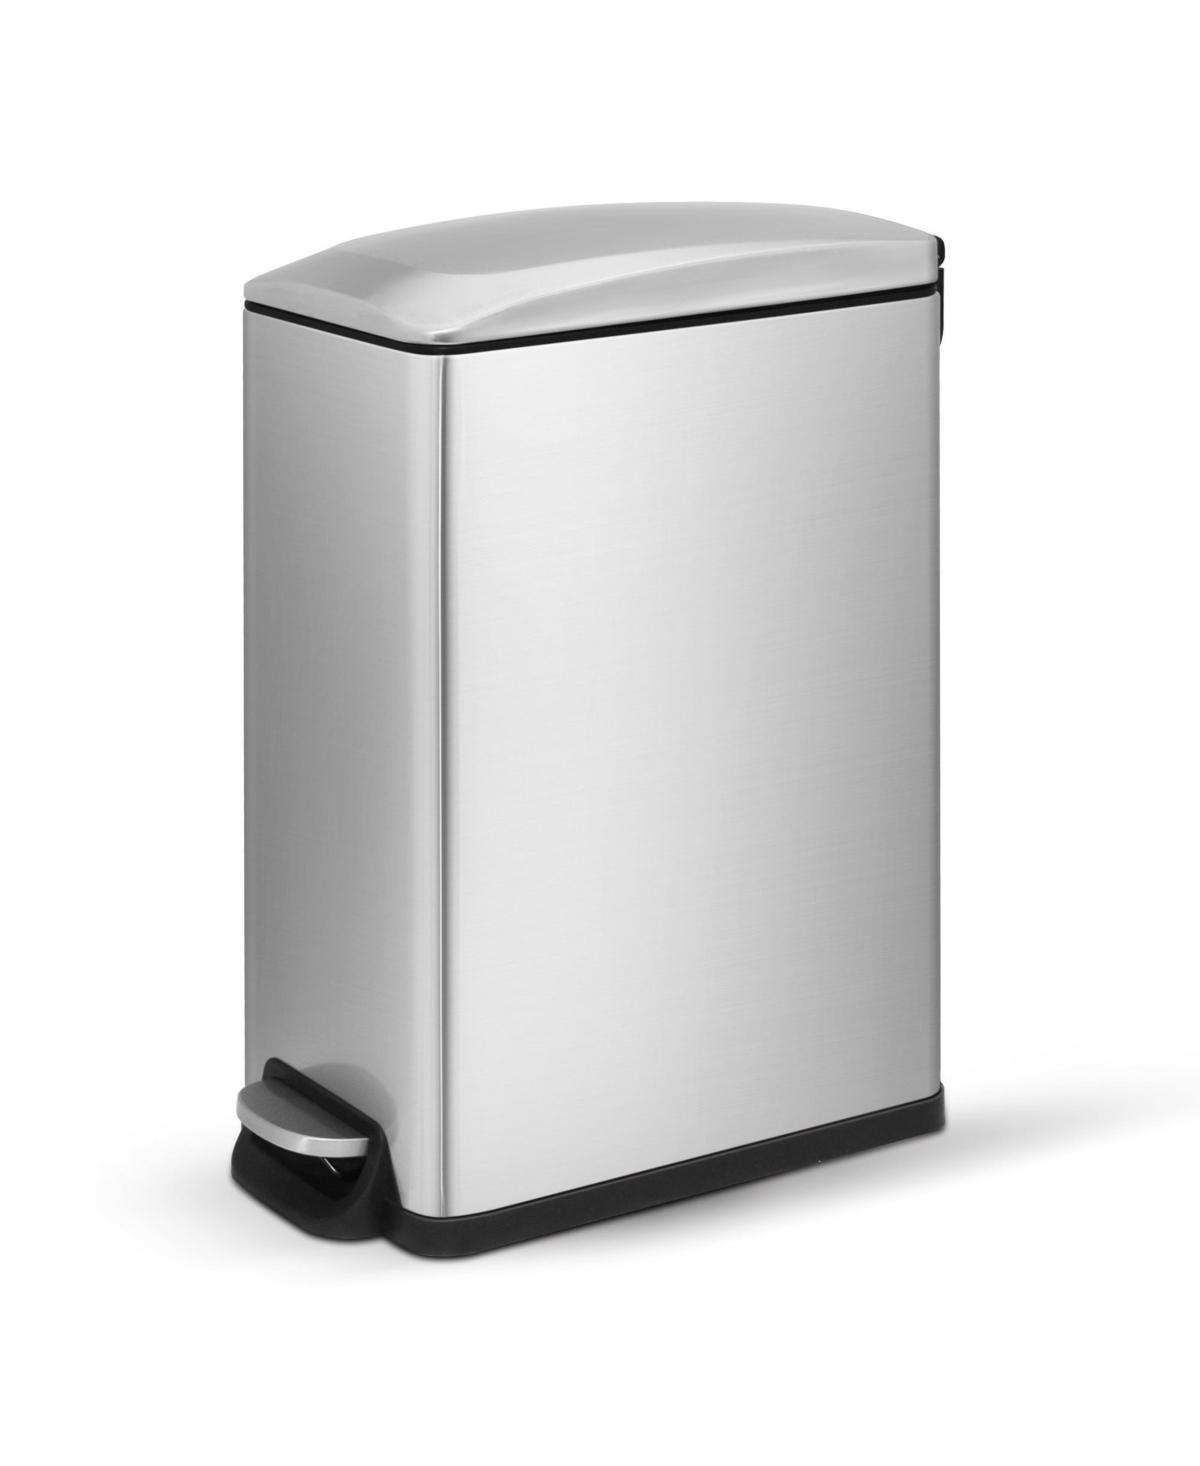 12 Gal/ 45 Liter Slim Stainless Steel Step-on kitchen Trash Can - Silver